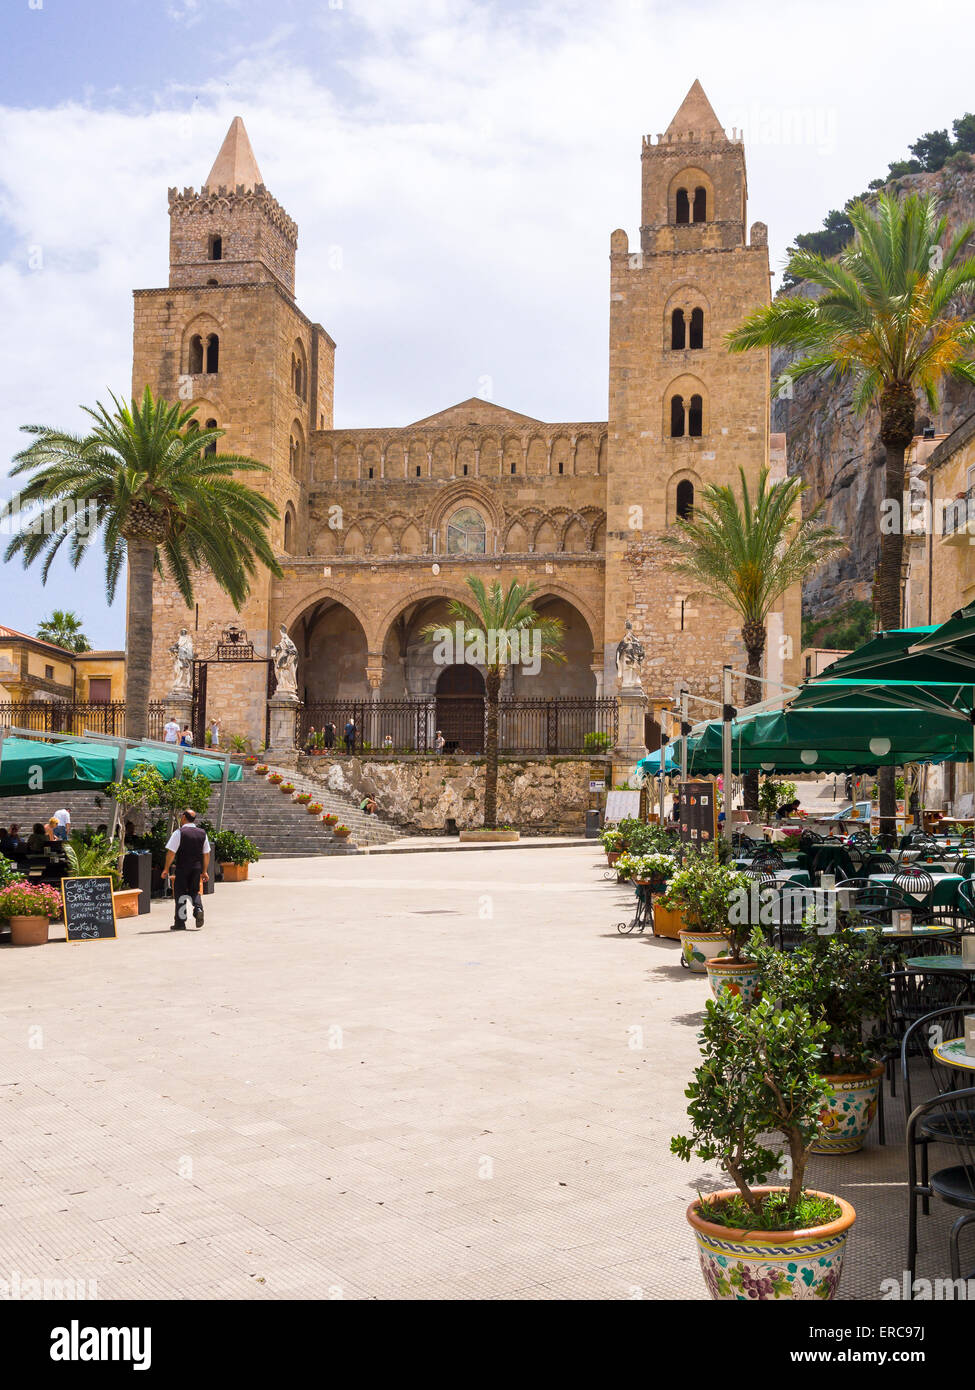 Cathedral Santissimo Salvatore with Piazza Duomo, Cefalu, Province of Palermo, Sicily, Italy Stock Photo